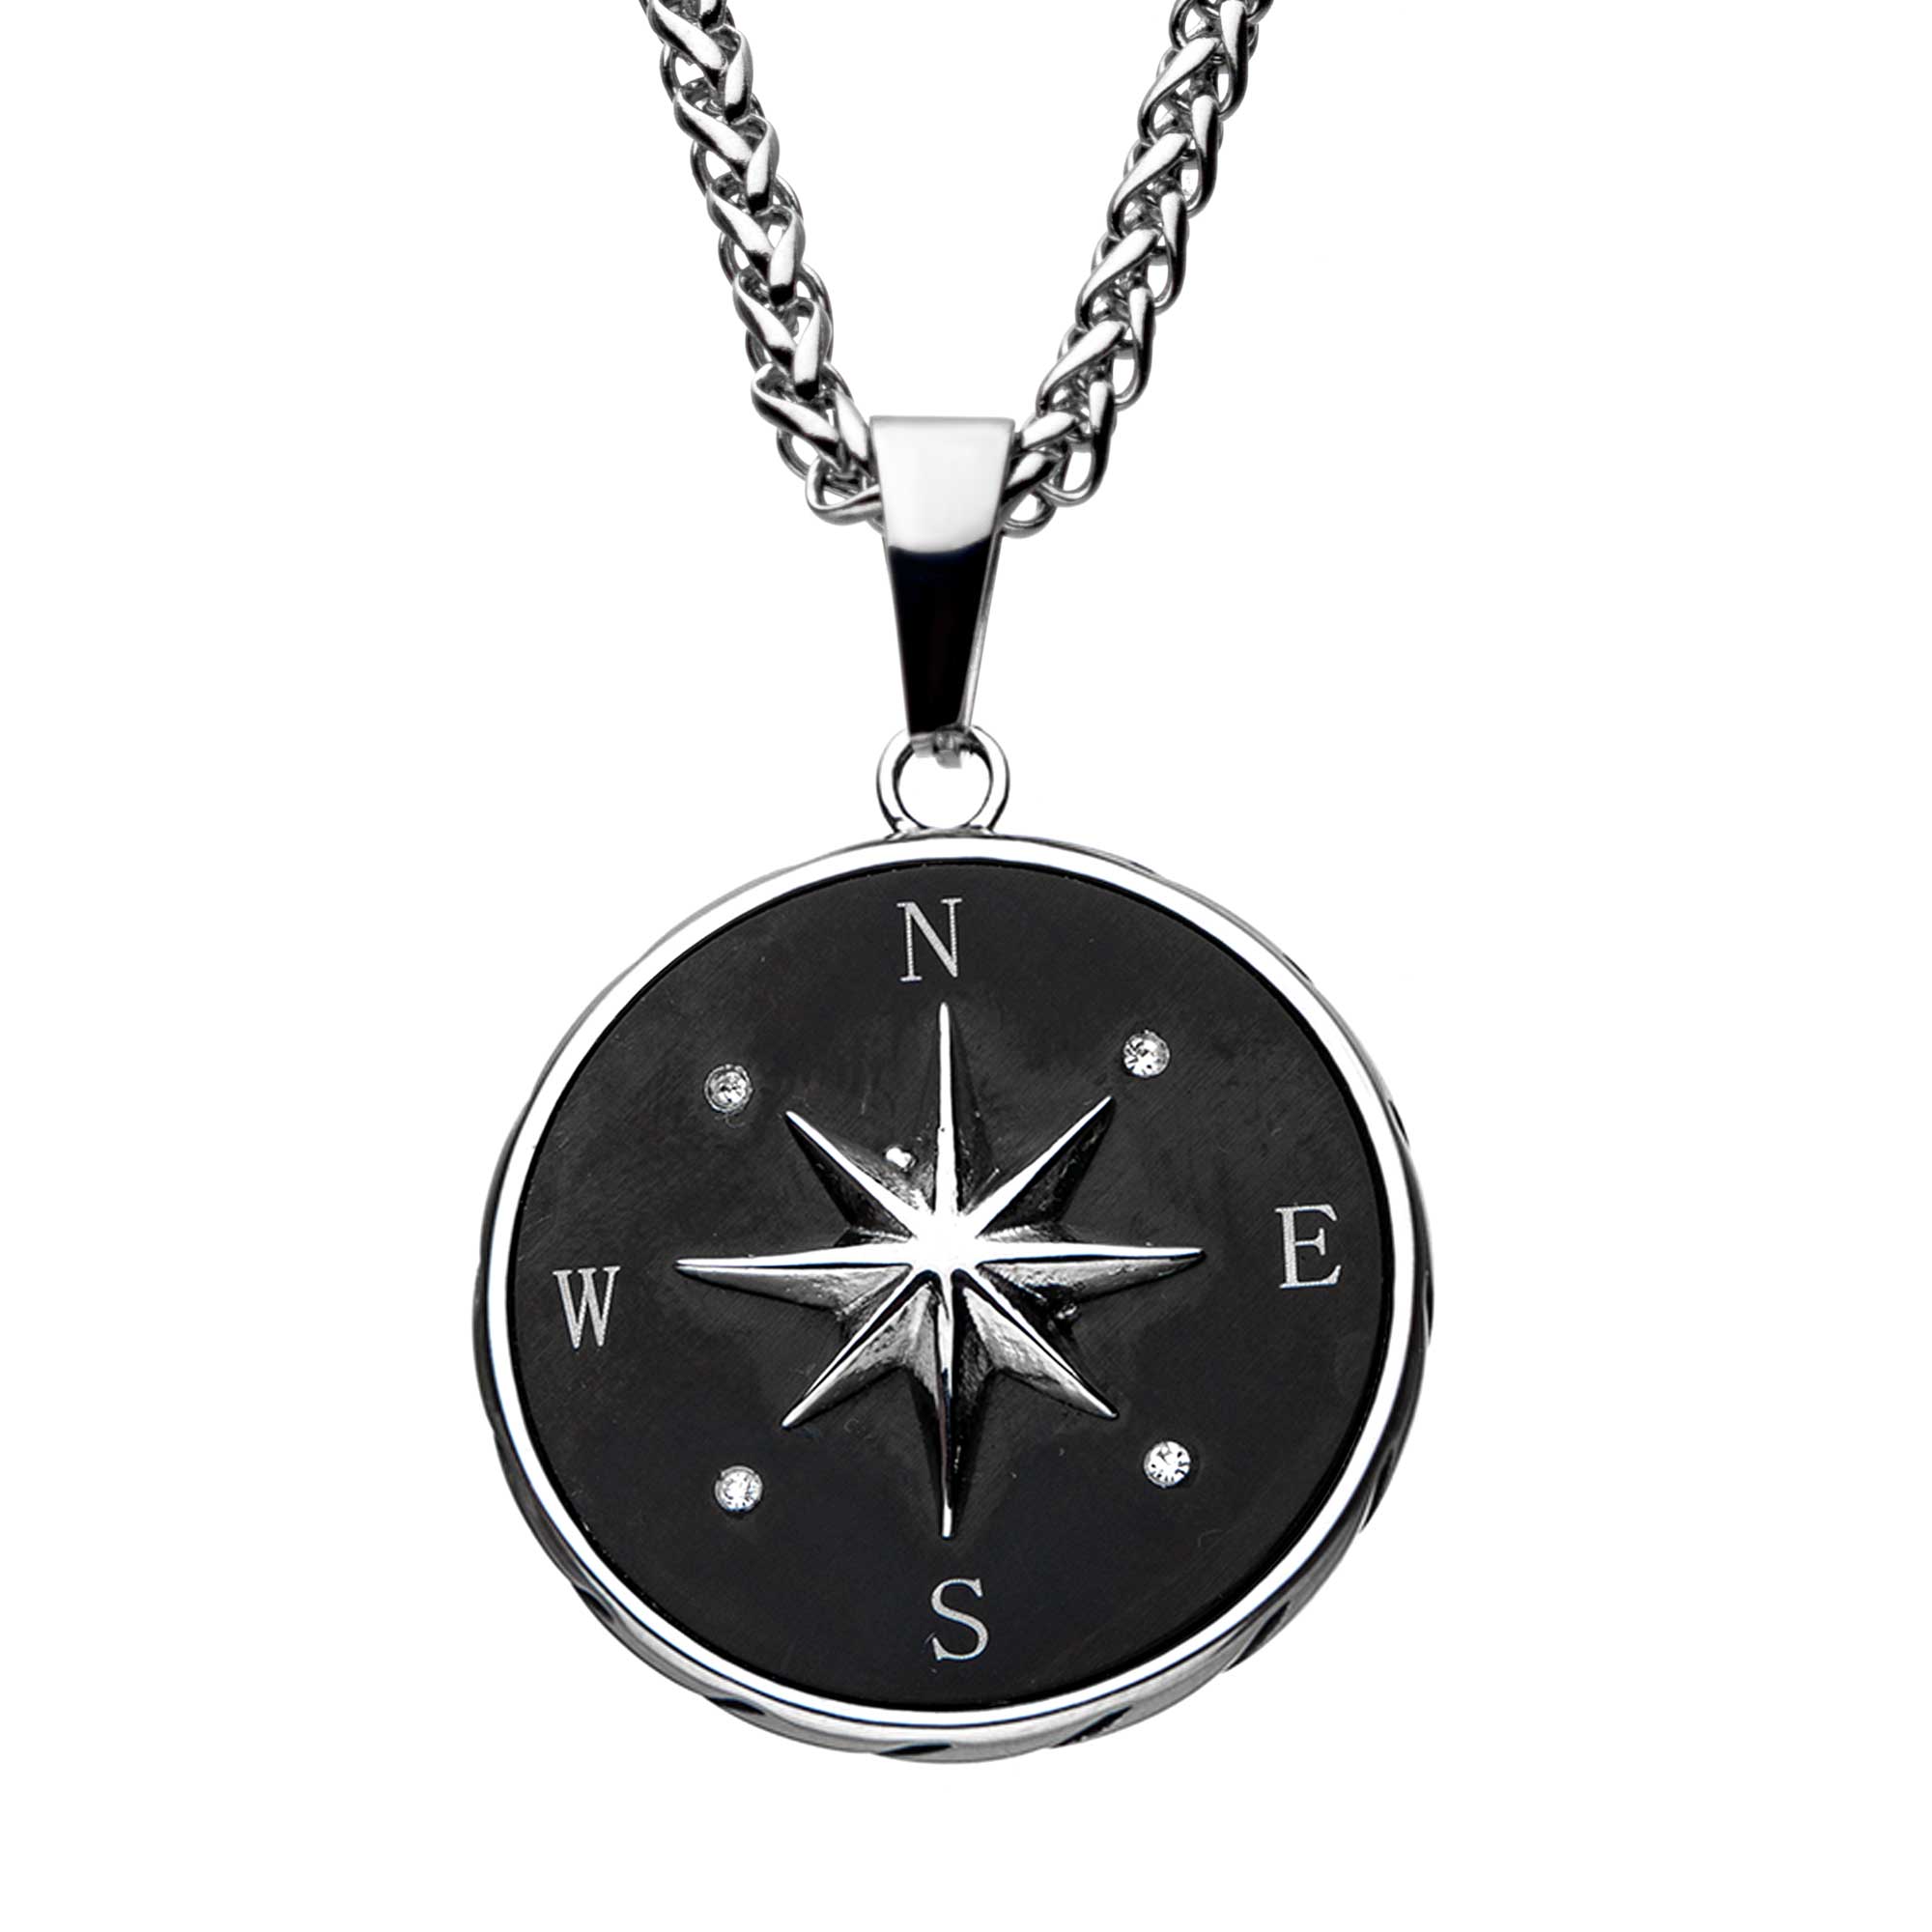 Stainless Steel and Black Plated Compass Pendant with Chain Ritzi Jewelers Brookville, IN